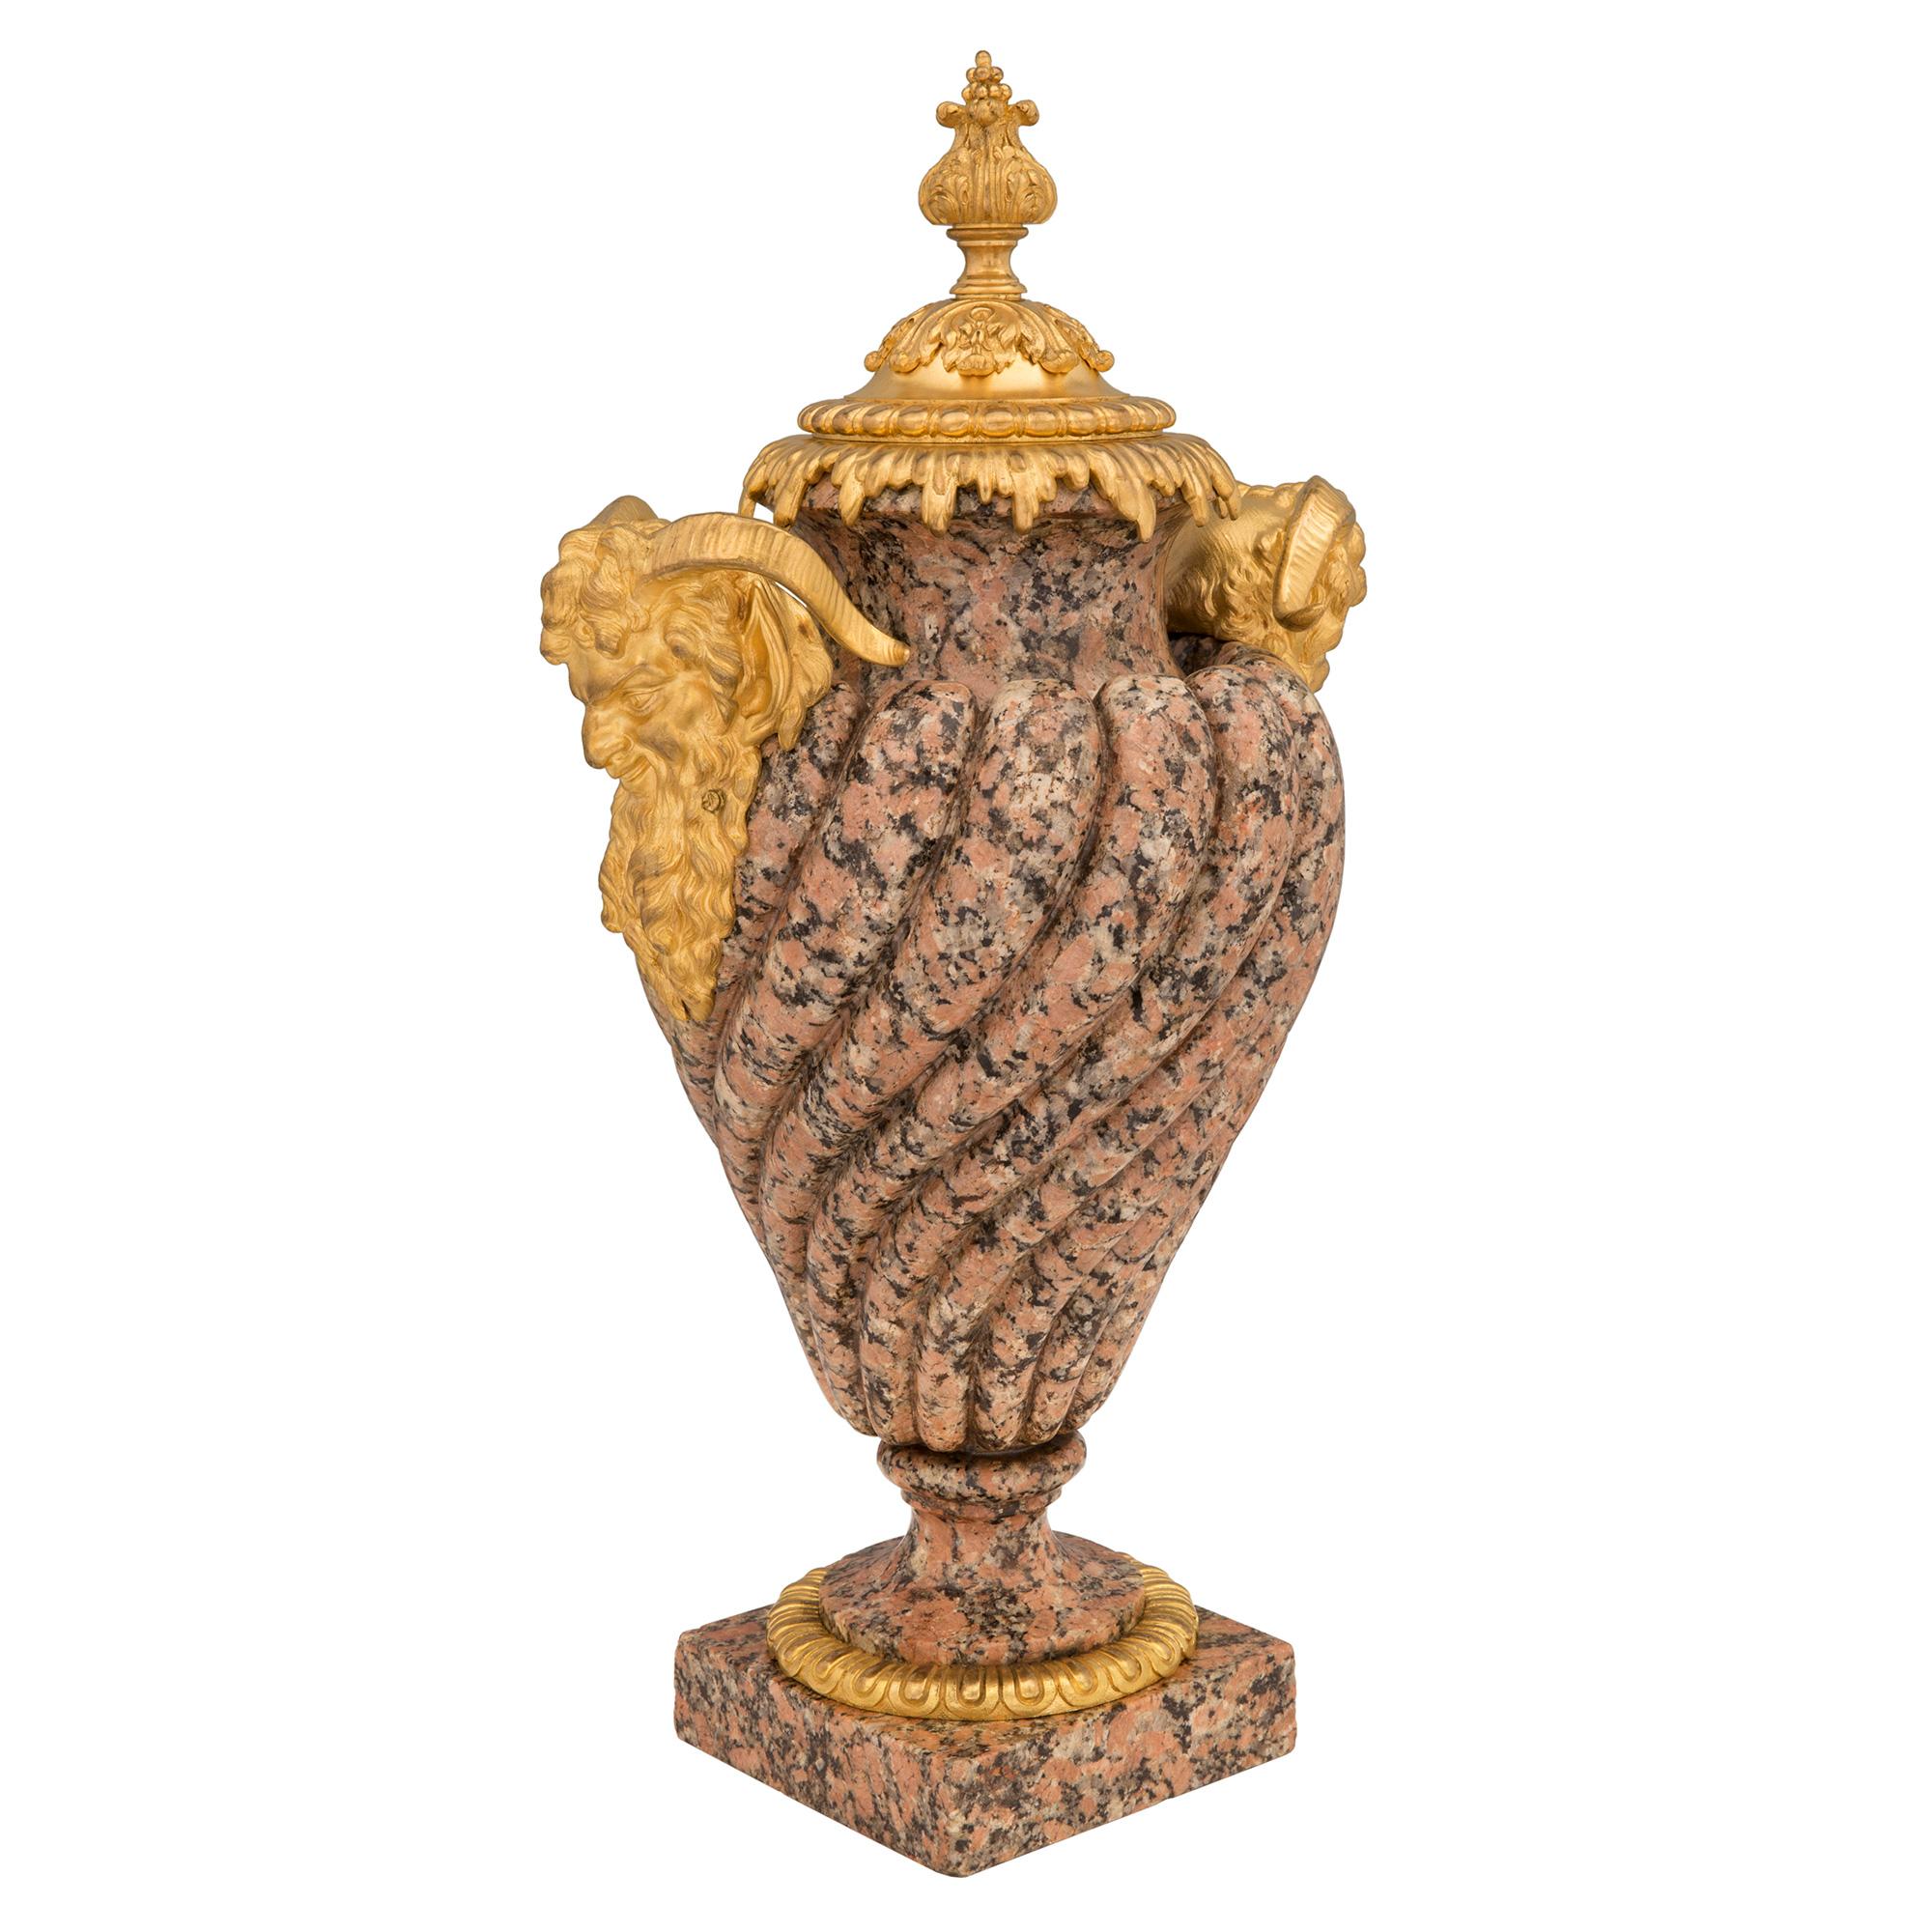 An impressive and high quality pair of French 19th century Louis XVI st. pink granite and ormolu urns. Each urn is raised by a square base decorated with a fine wrap around ormolu band. Above the socle pedestals are the stunning and wonderfully